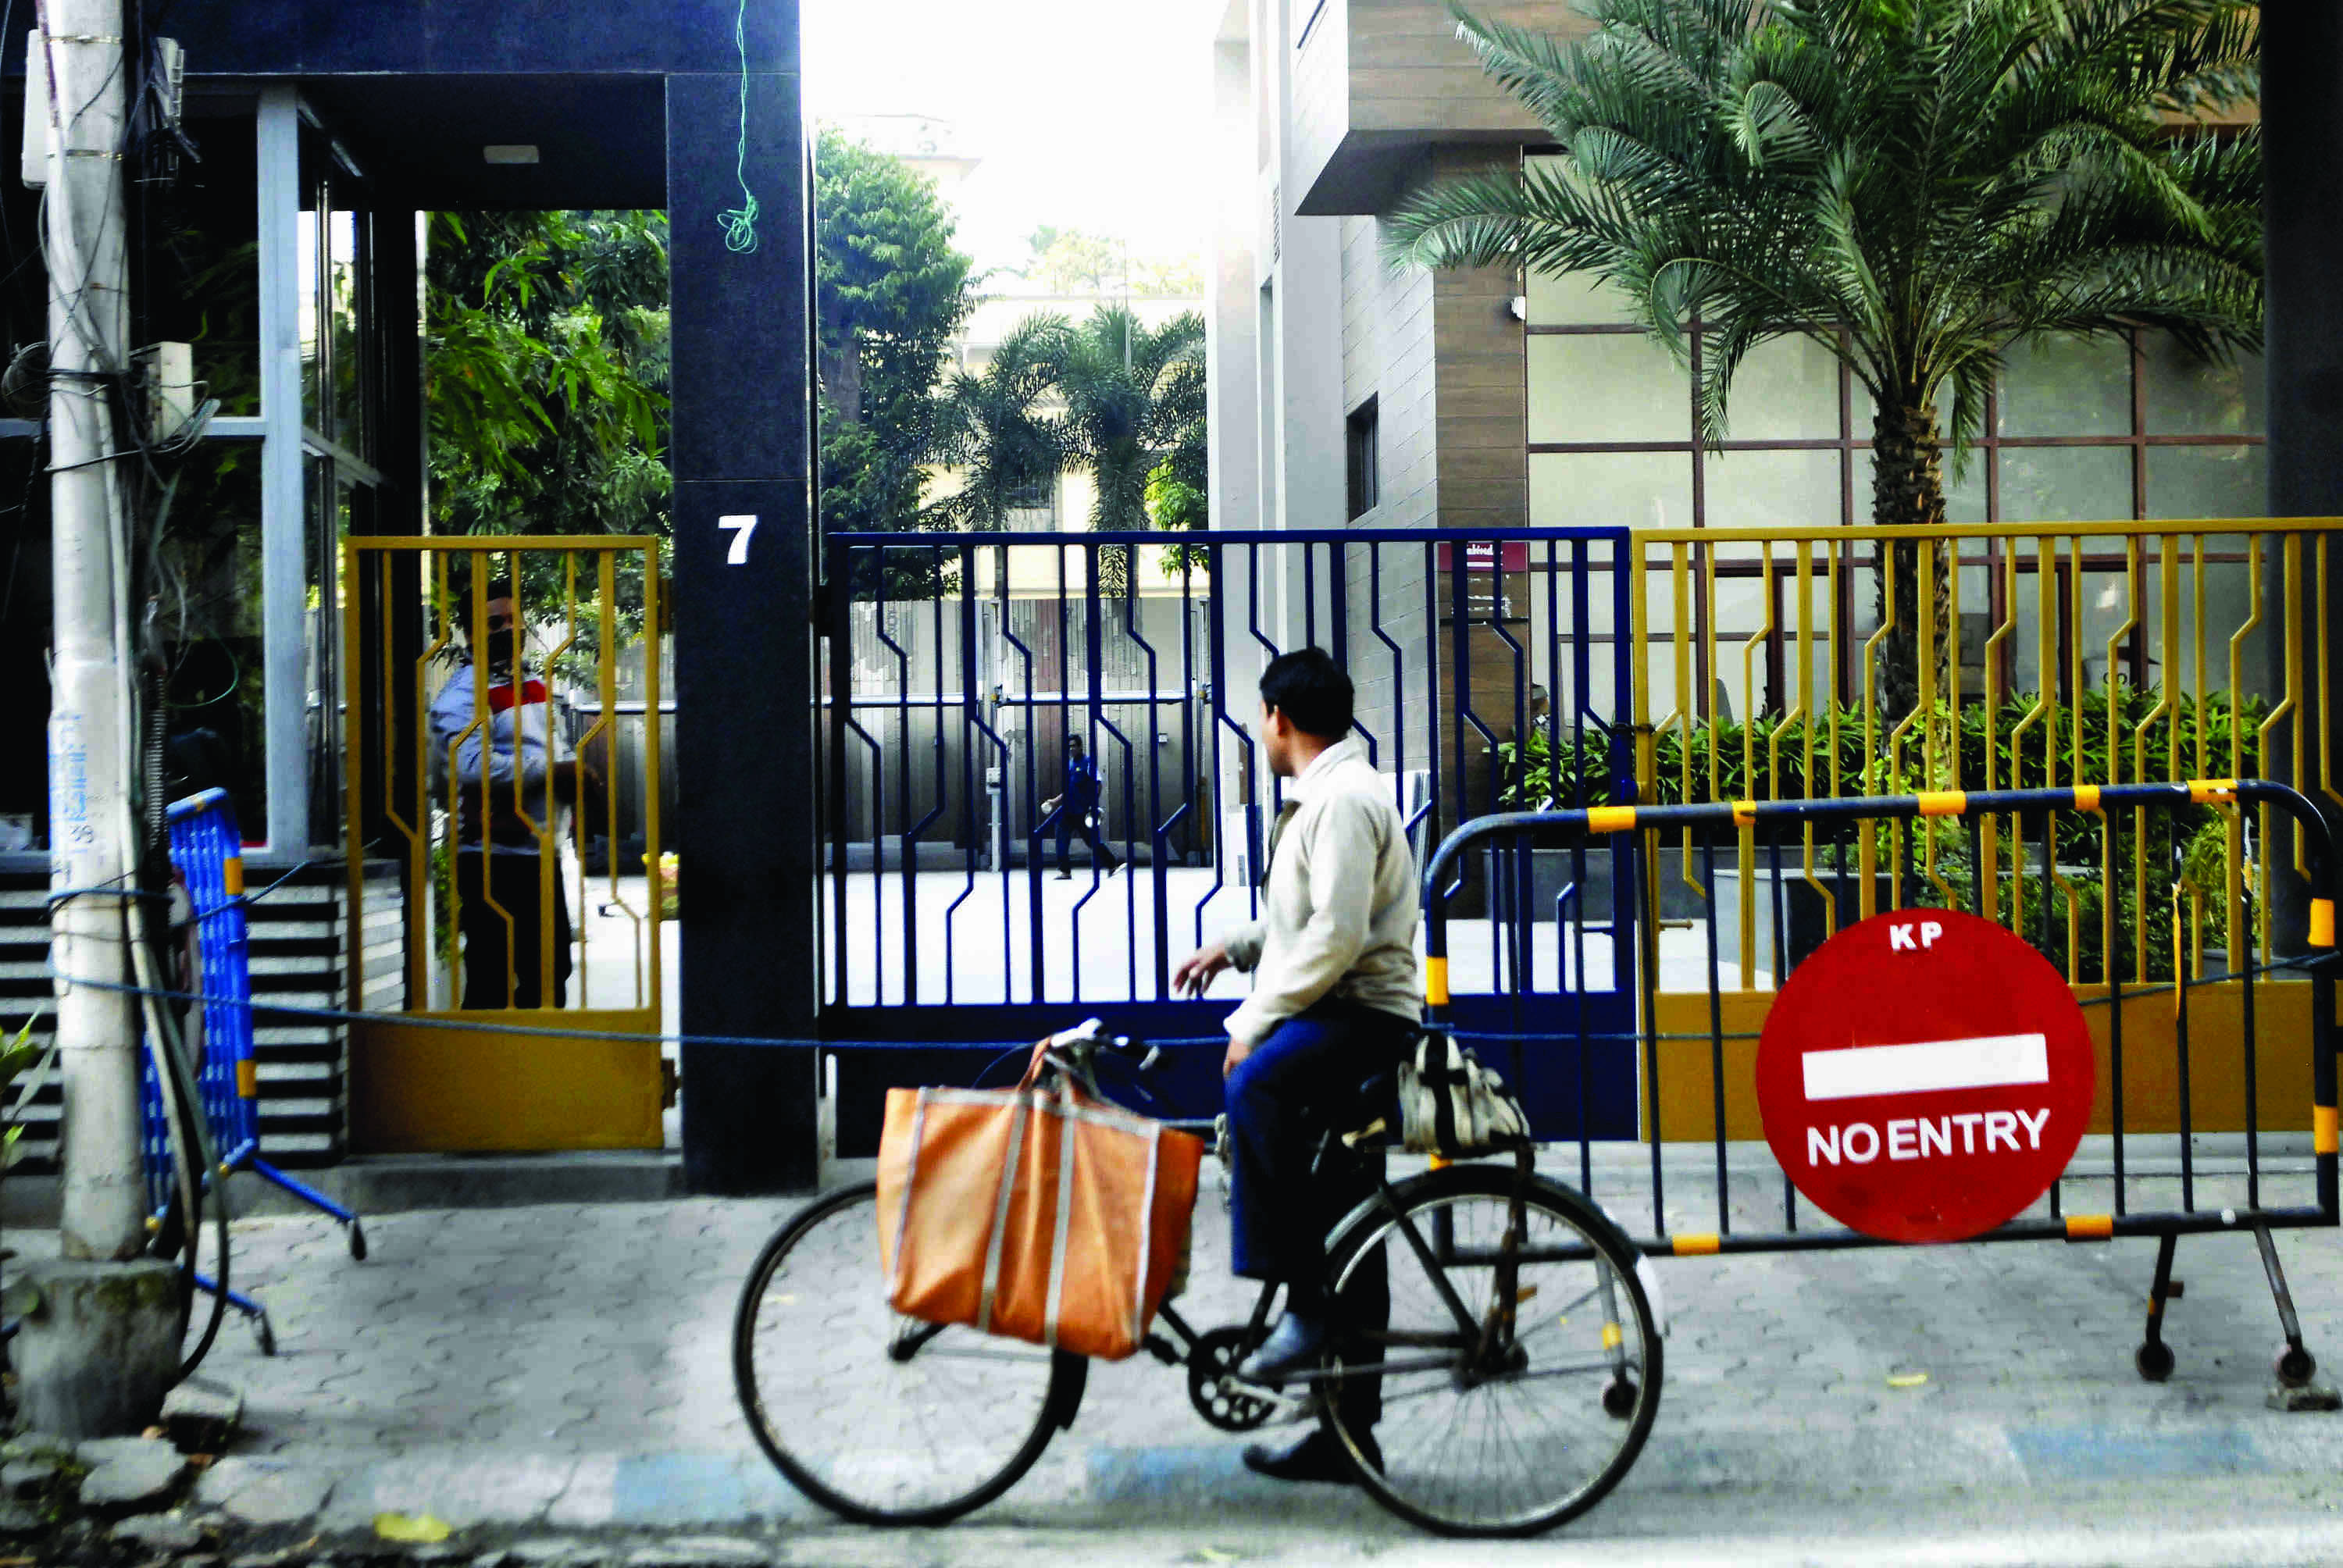 Upsurge in infection rate: At 47, containment zones in KMC area almost double in 3 days